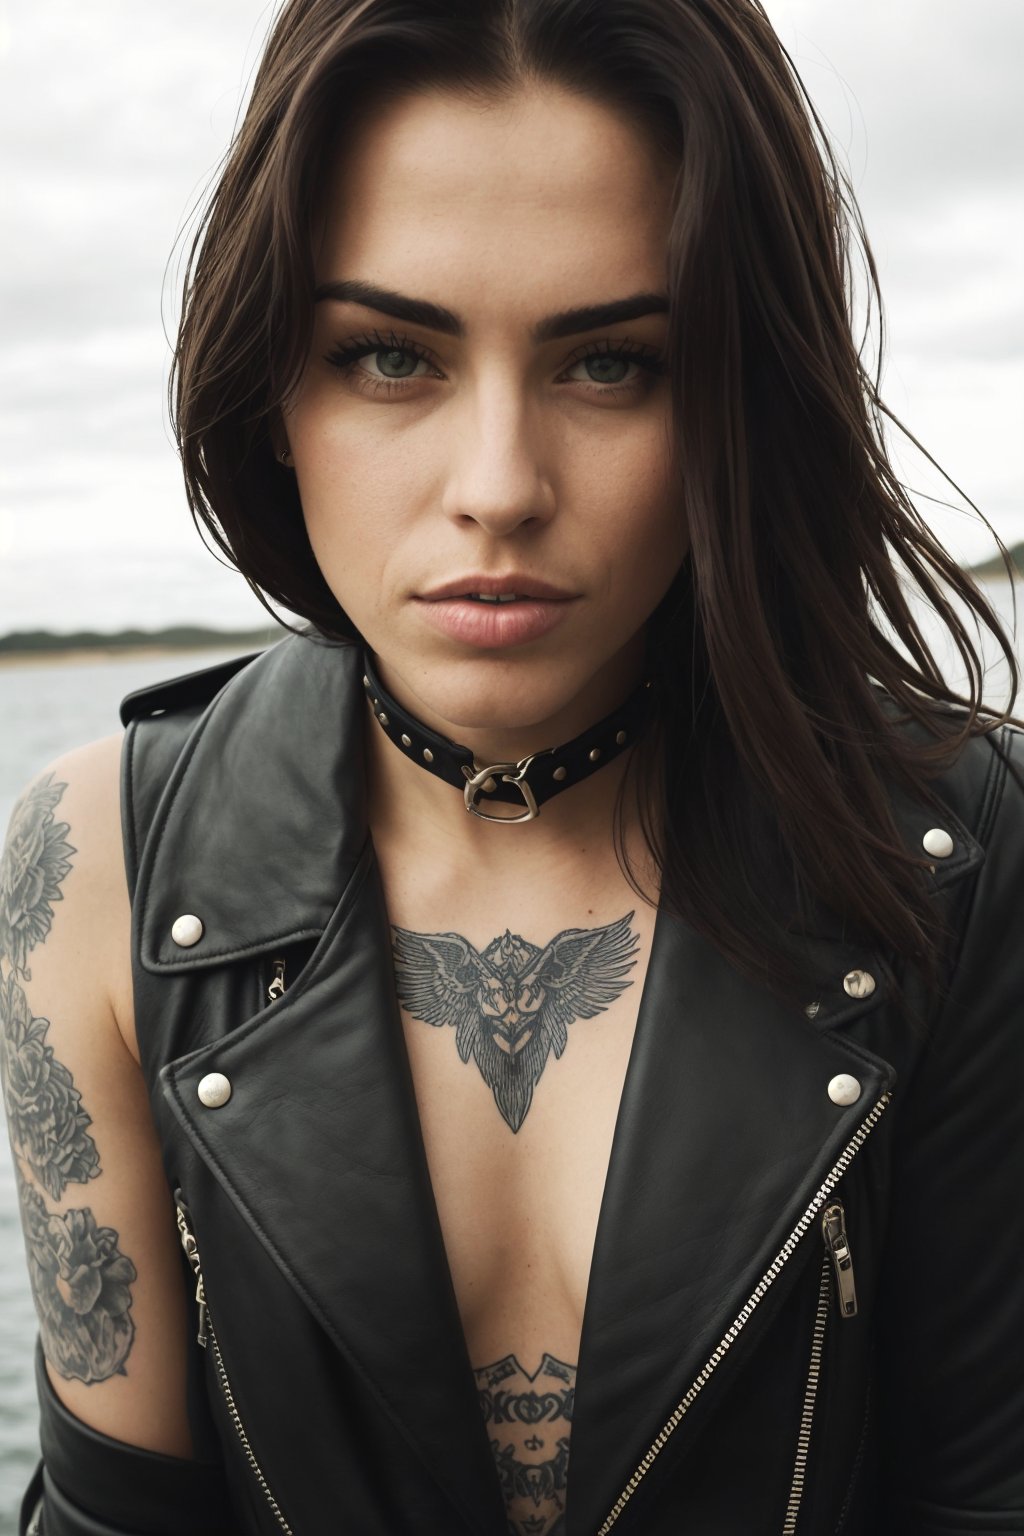 amator, beautiful face, biker girl, serious face, neck tatoo, analog style, instagram photo, club, real life photo, dramatic, atmospheric, realistic face, perfect eyes, biker outfit, super powerful pose, full body,